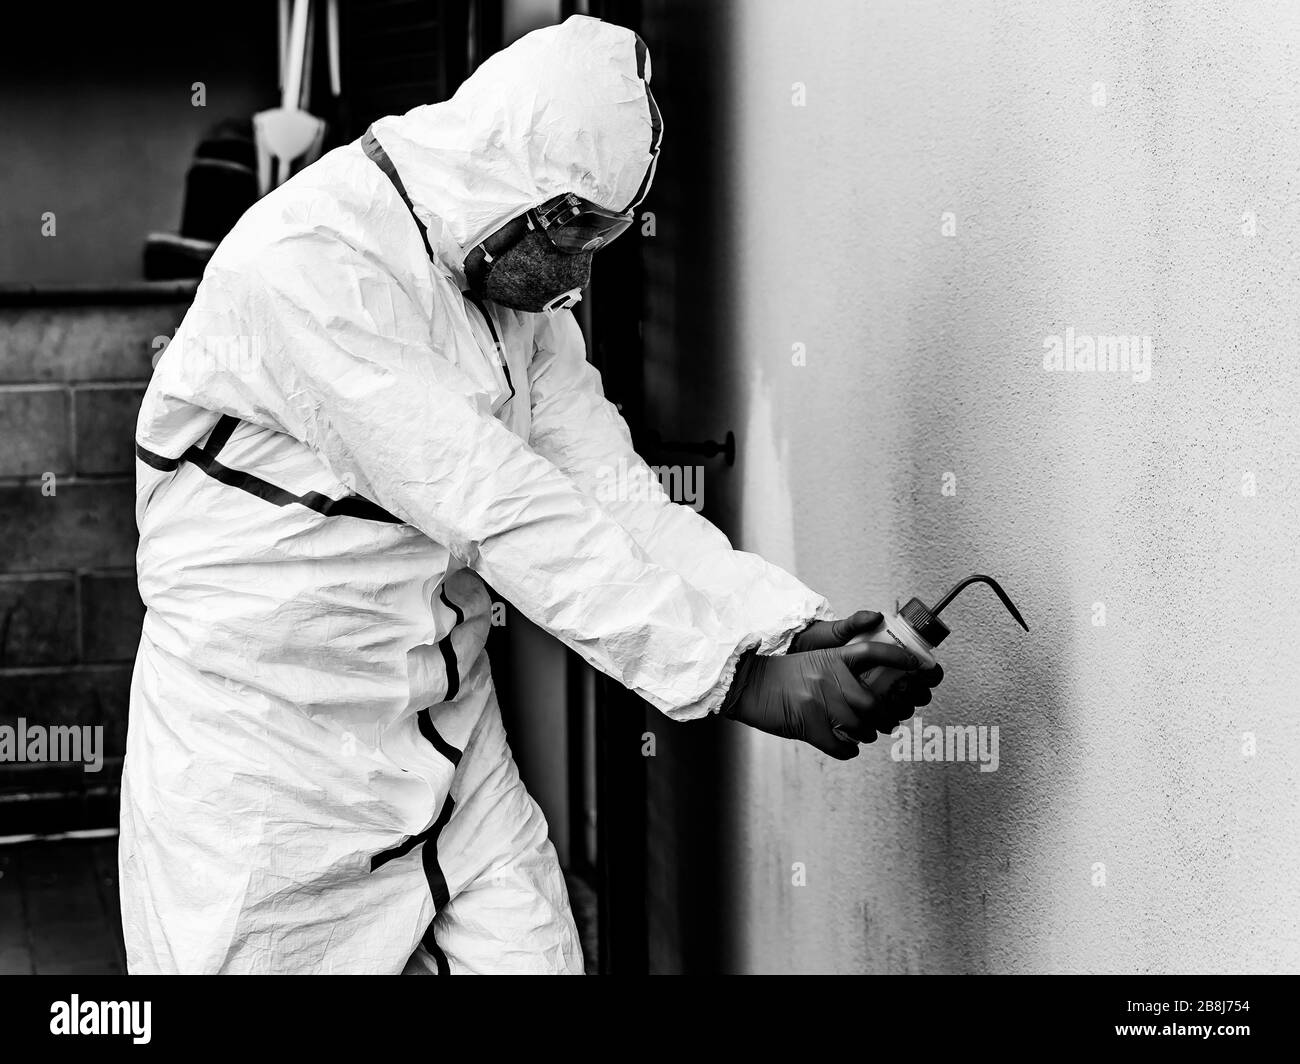 Healthcare worker with full white coverall disinfects from possible infection with Coronavirus Covid-19, using a hydro alcoholic spray solution Stock Photo